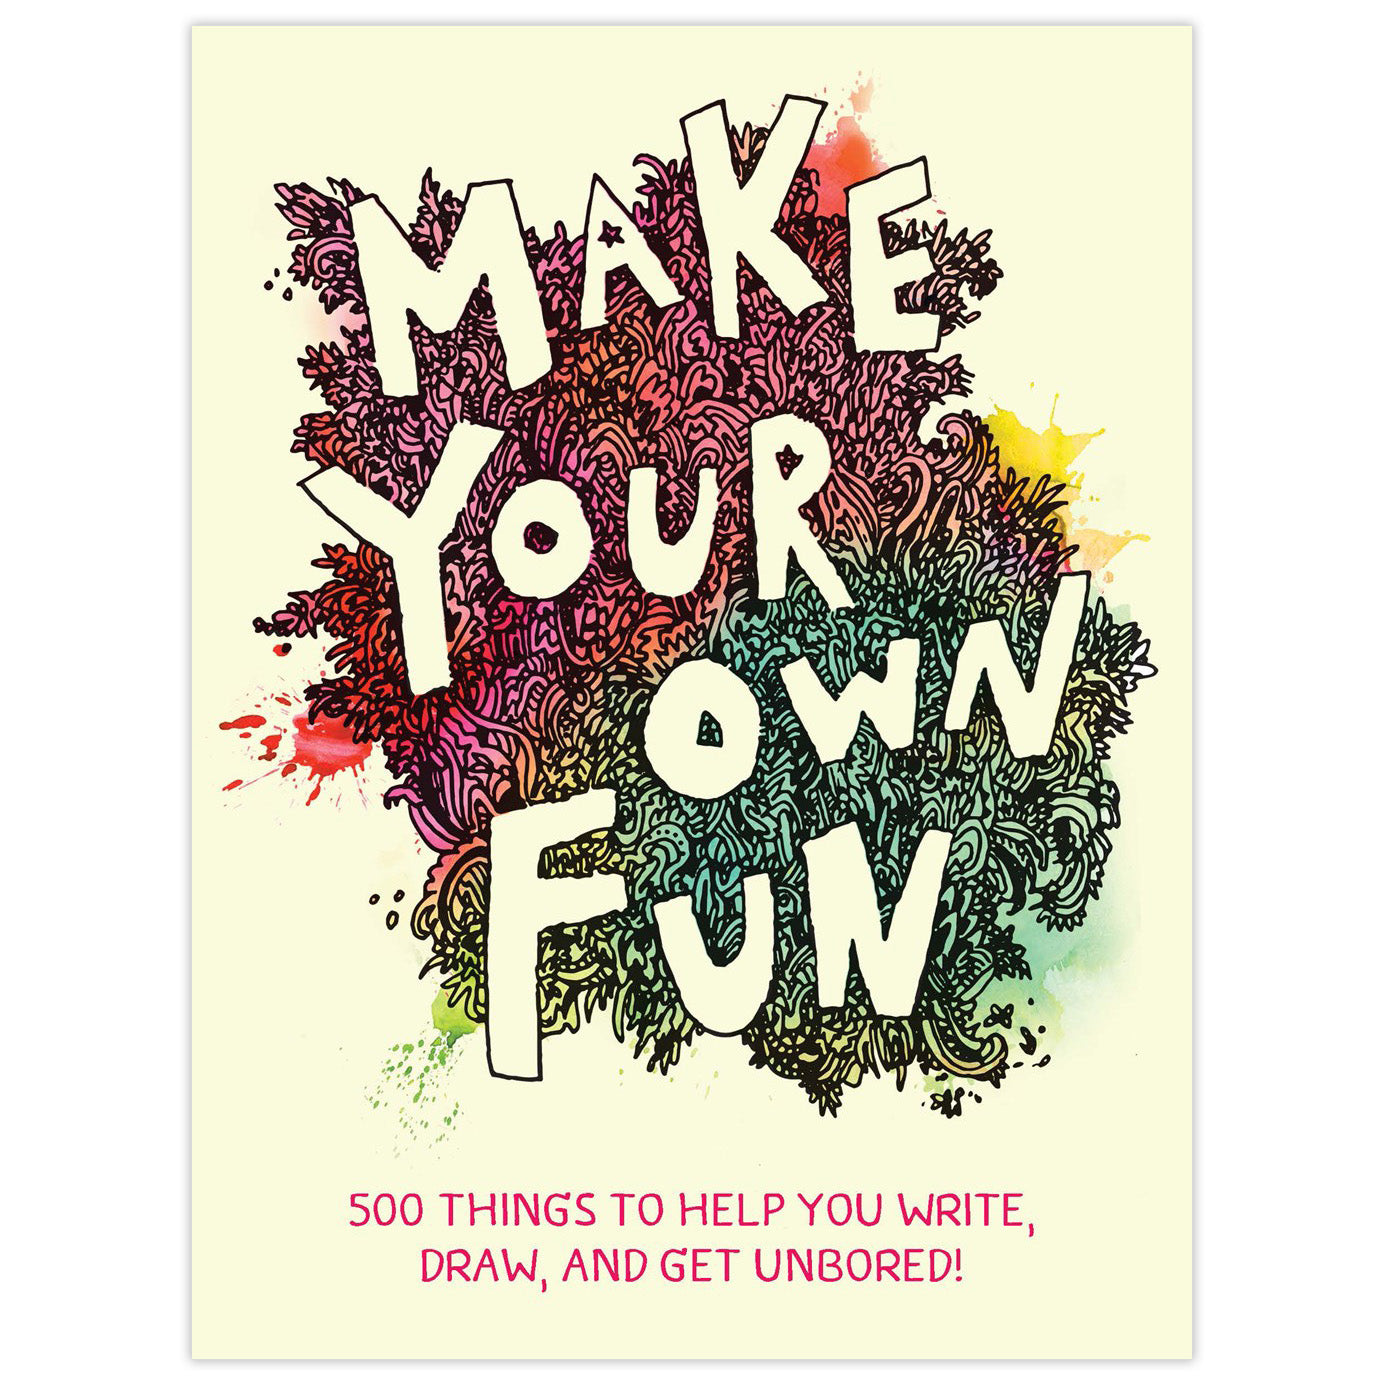 Make Your Own Fun: 500 Things to Help You Write, Draw, and Get Unbored!